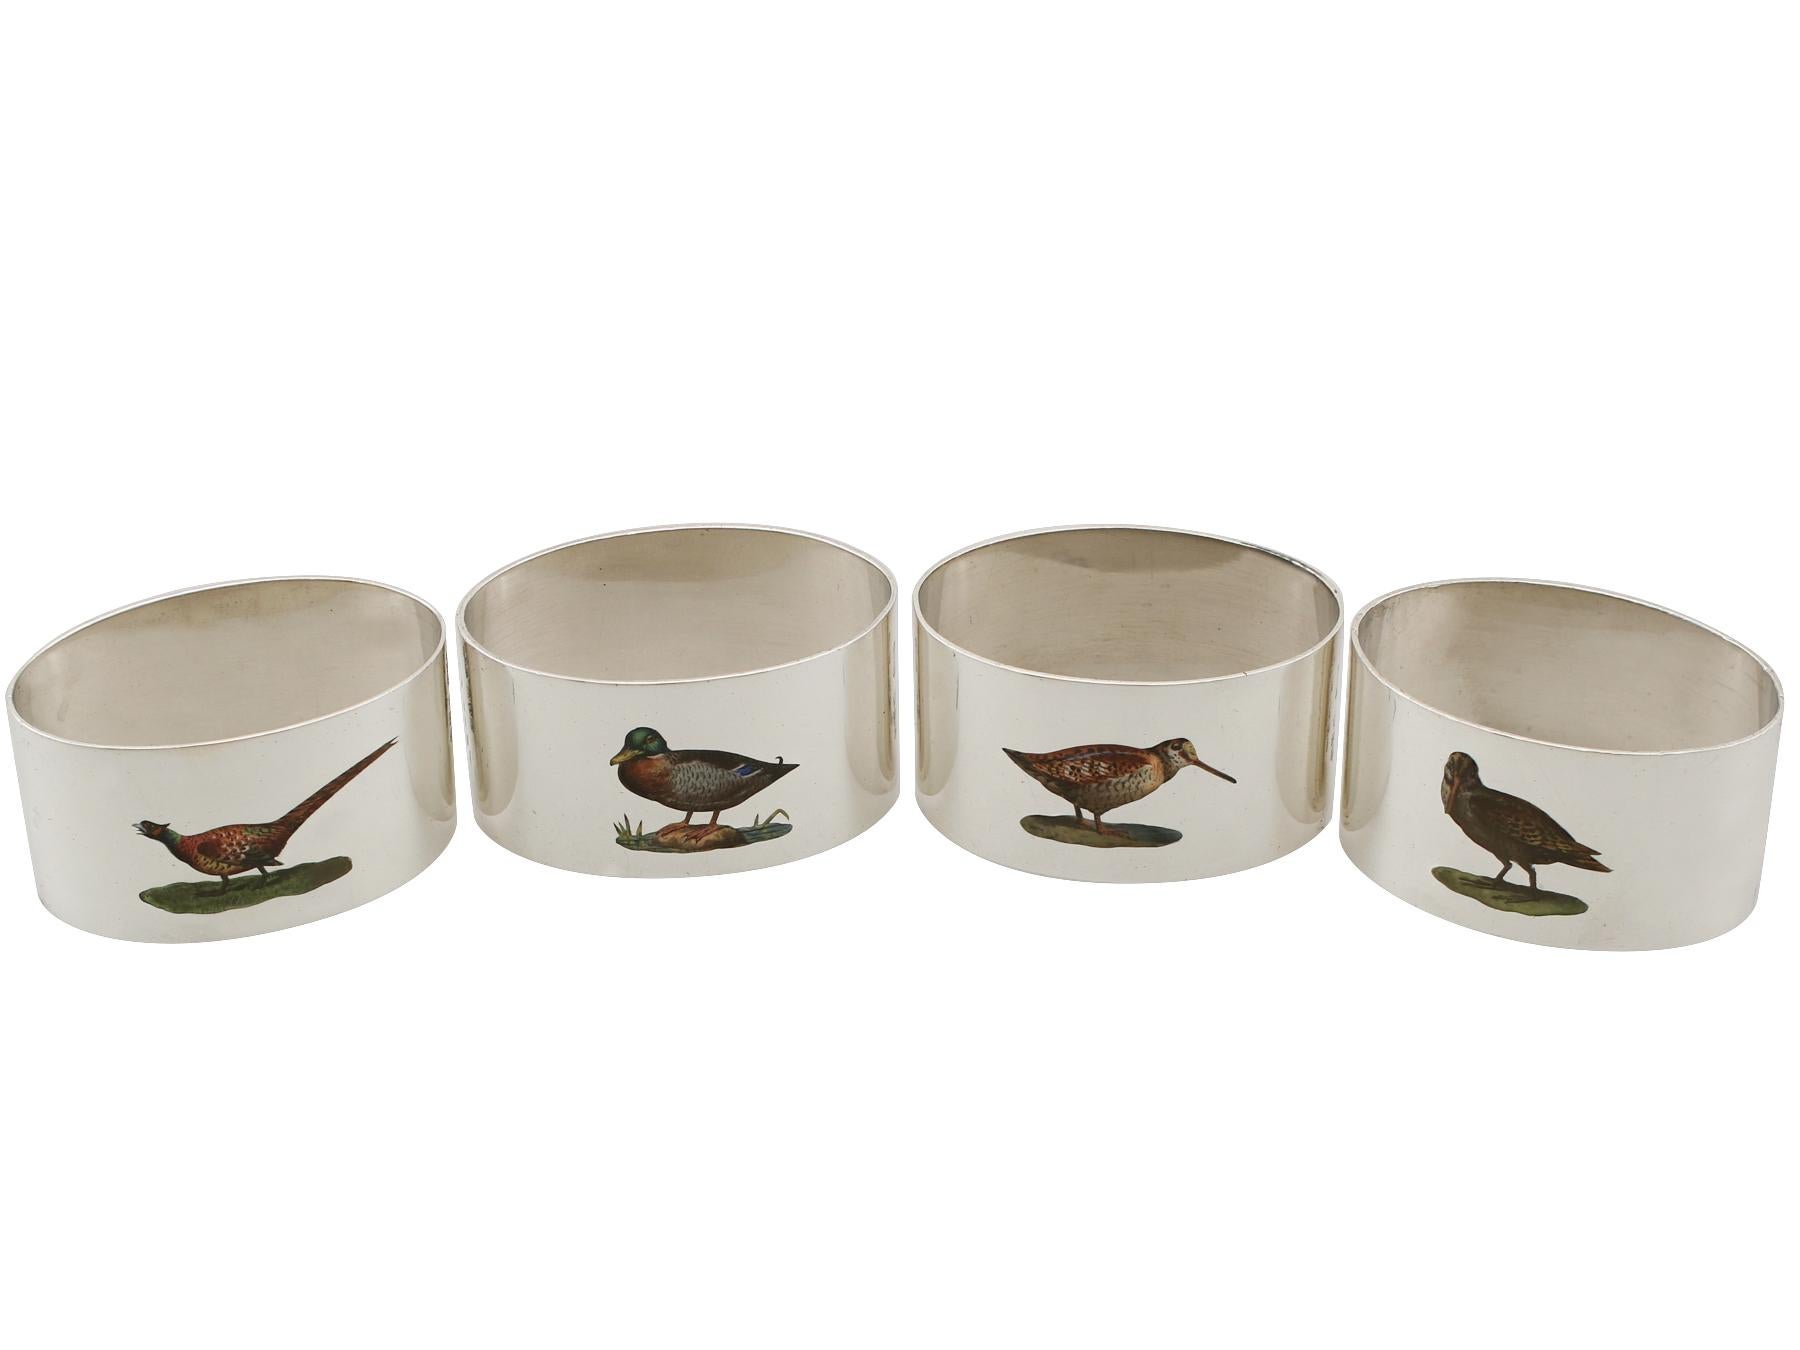 An exceptional, fine and impressive set of four antique English sterling silver napkin rings with enamel birds; an addition to our dining silverware collection.

This exceptional set of antique George V sterling silver napkin rings consists of four